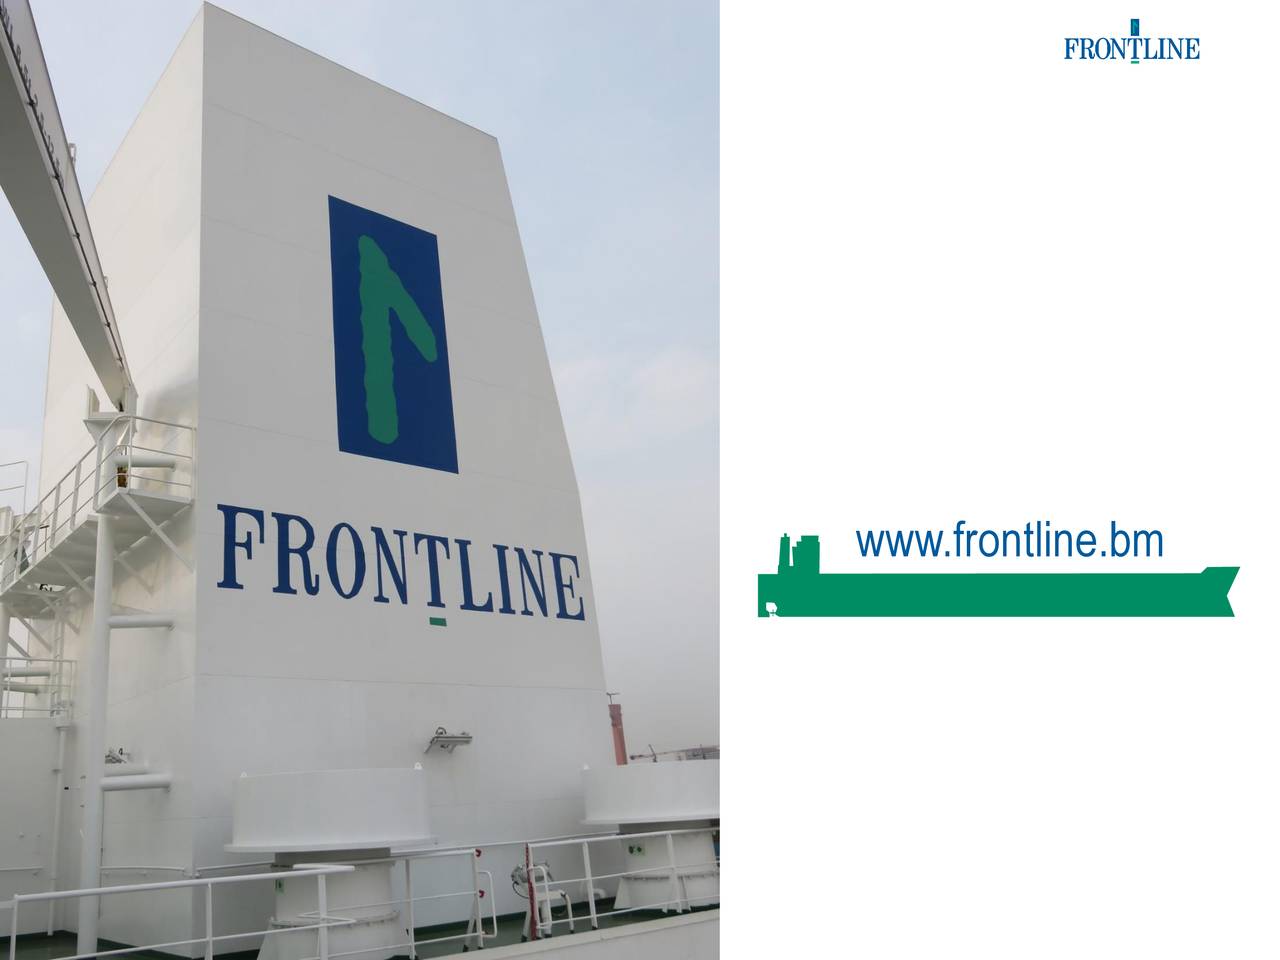 frontline-ltd-2020-q1-results-earnings-call-presentation-nyse-fro